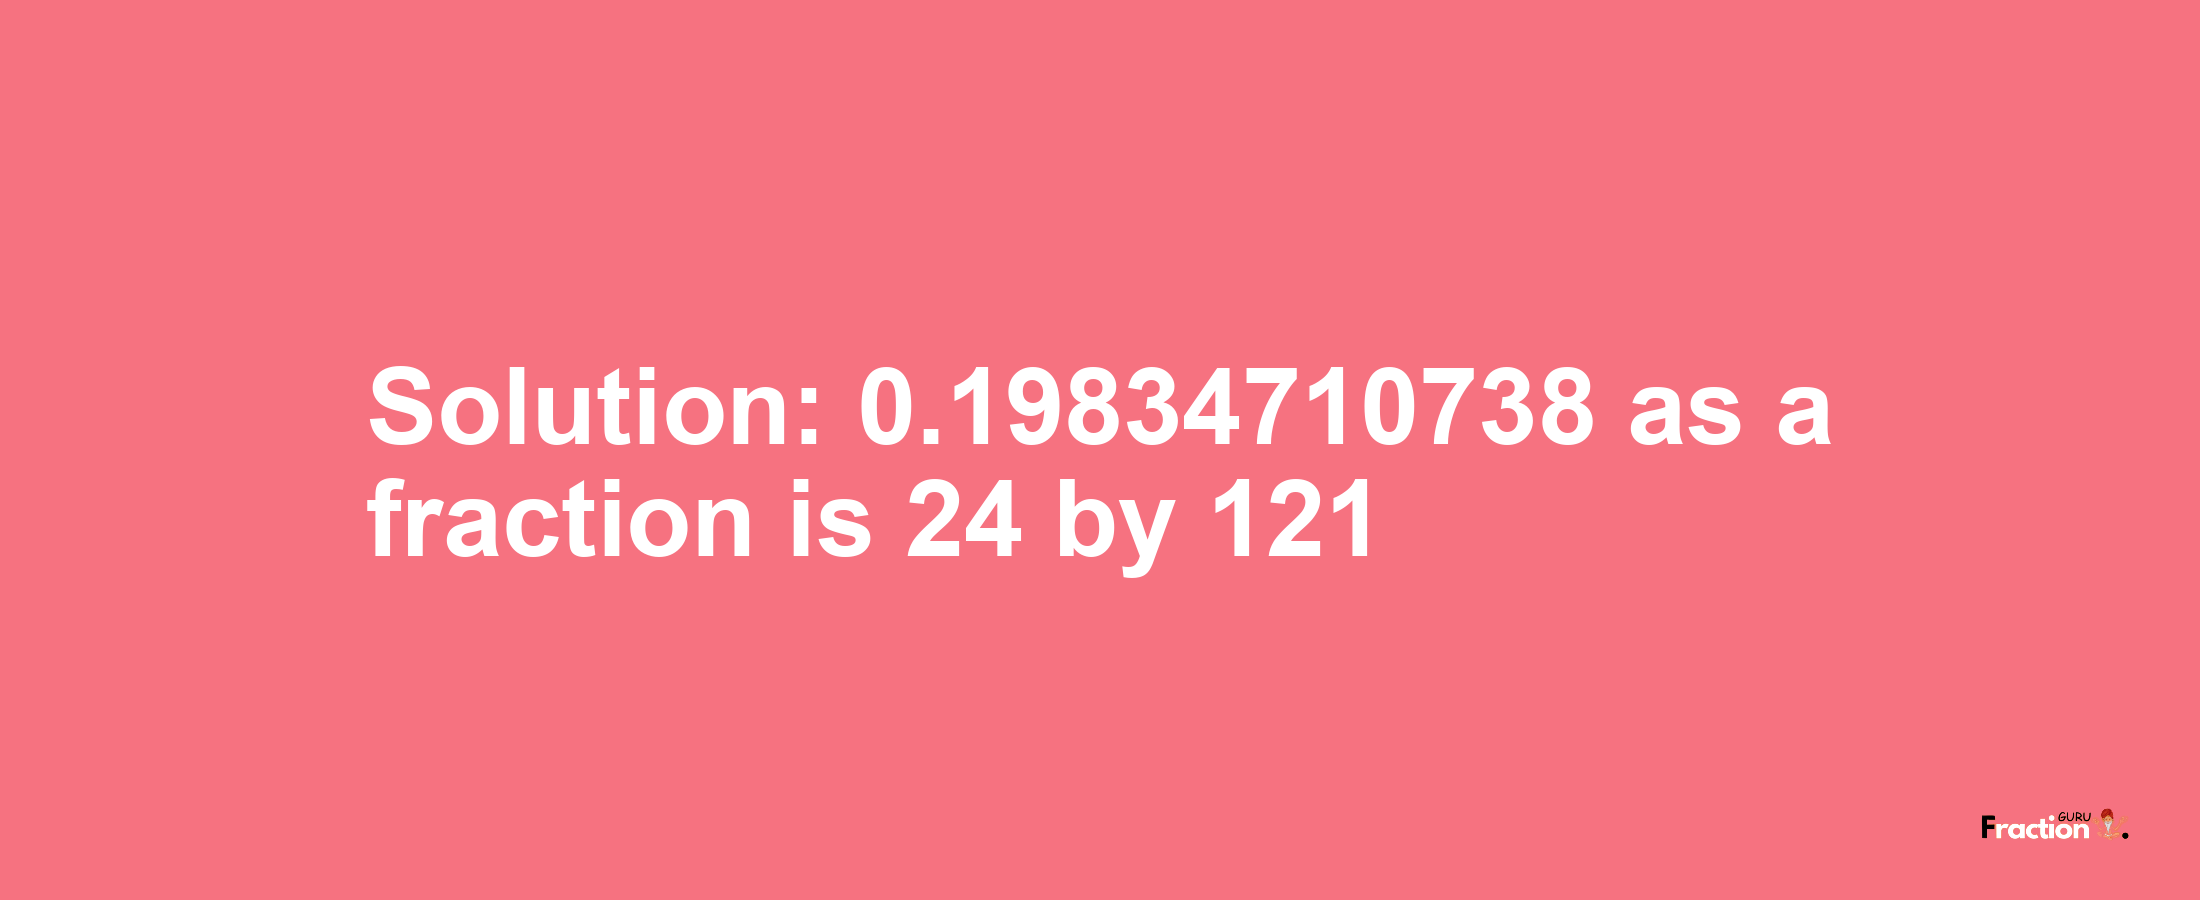 Solution:0.19834710738 as a fraction is 24/121